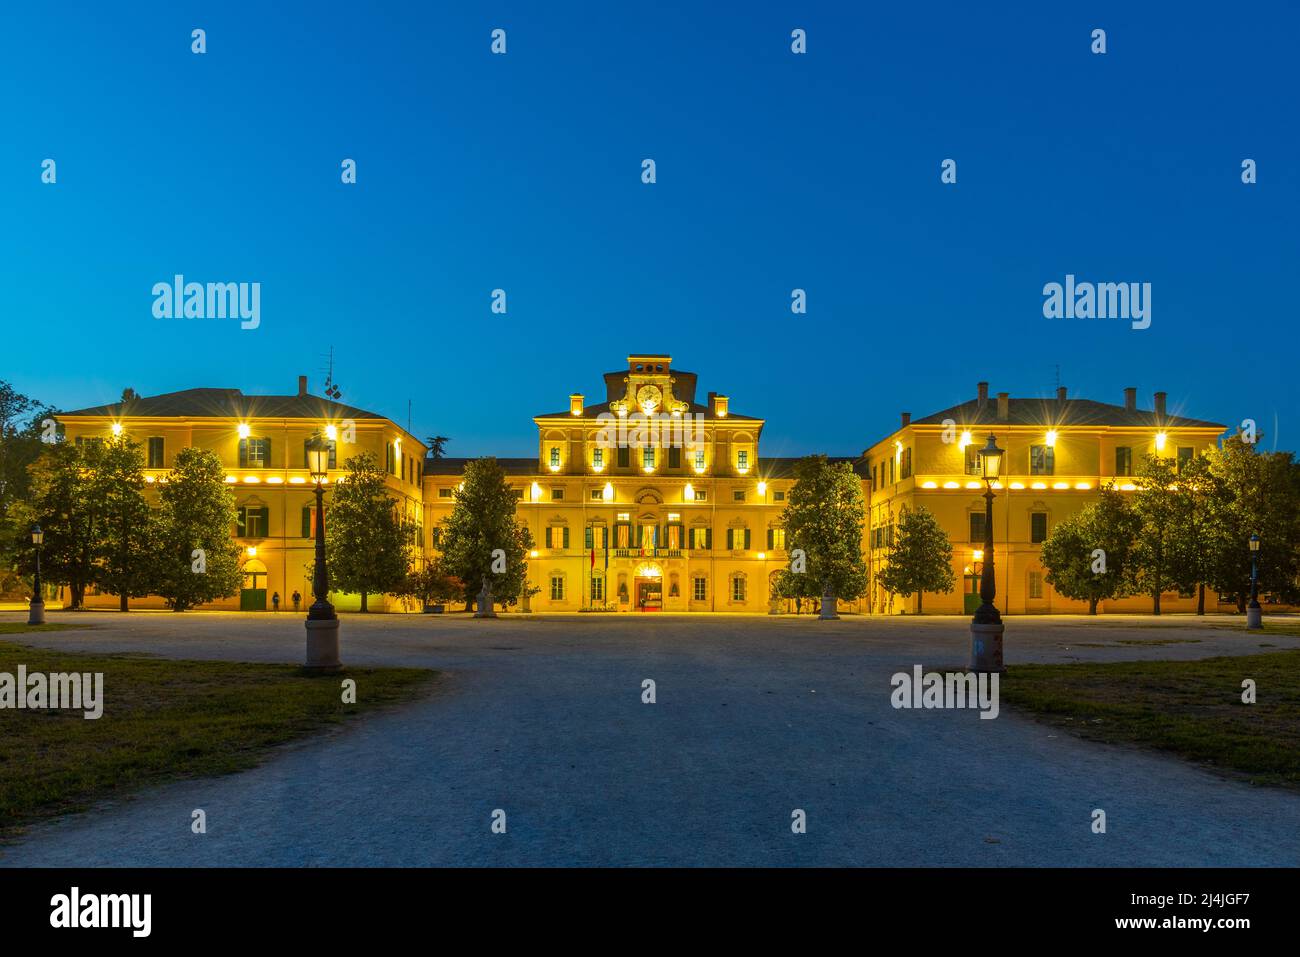 Nachtansicht des Palazzo Ducale in Parma, Italien. Stockfoto